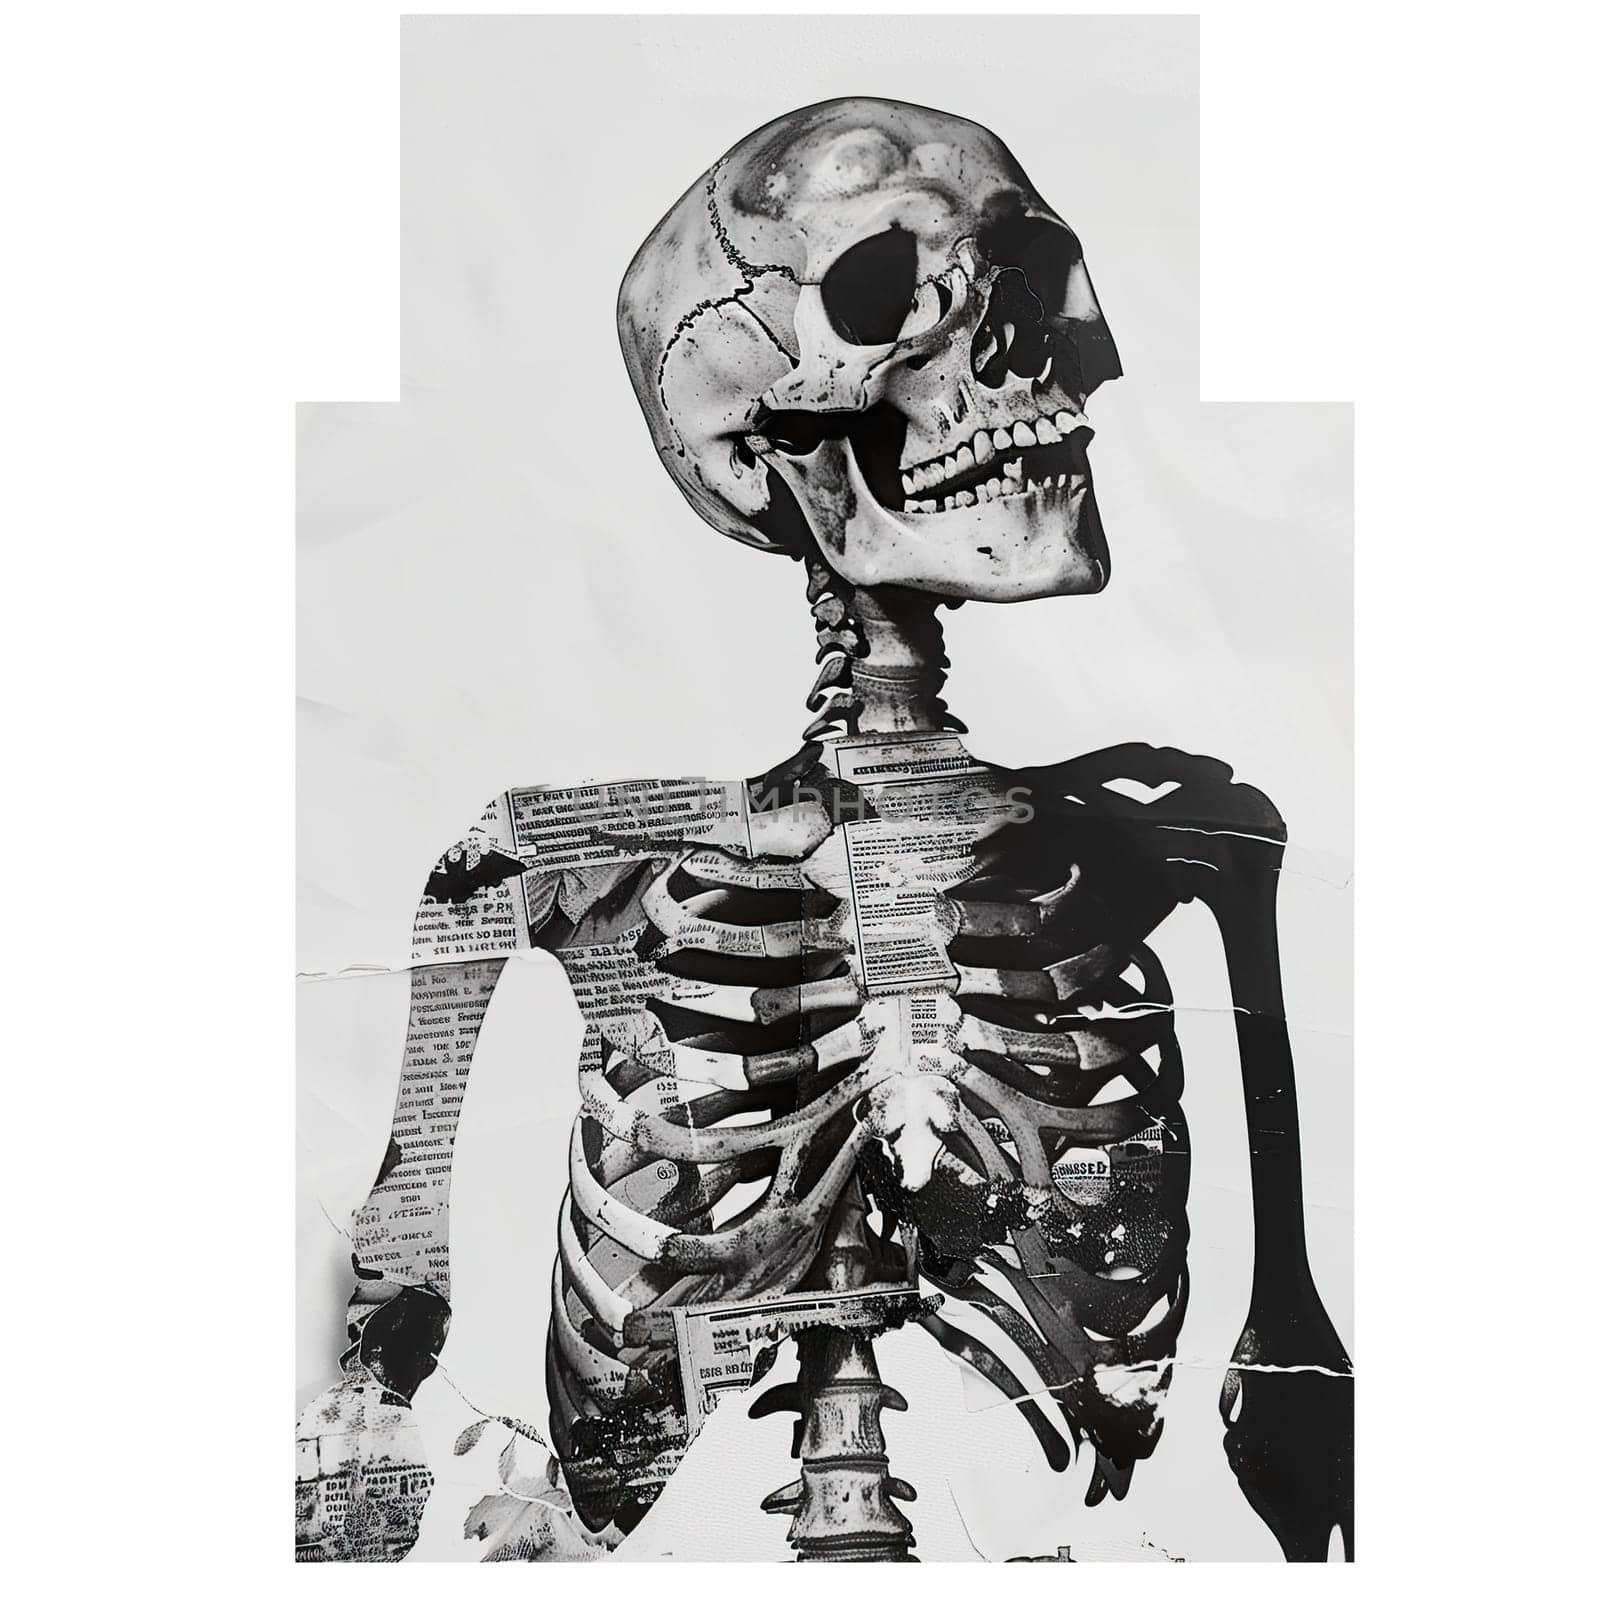 Monochrome vintage photo of halloween skeleton cut out image by Dustick